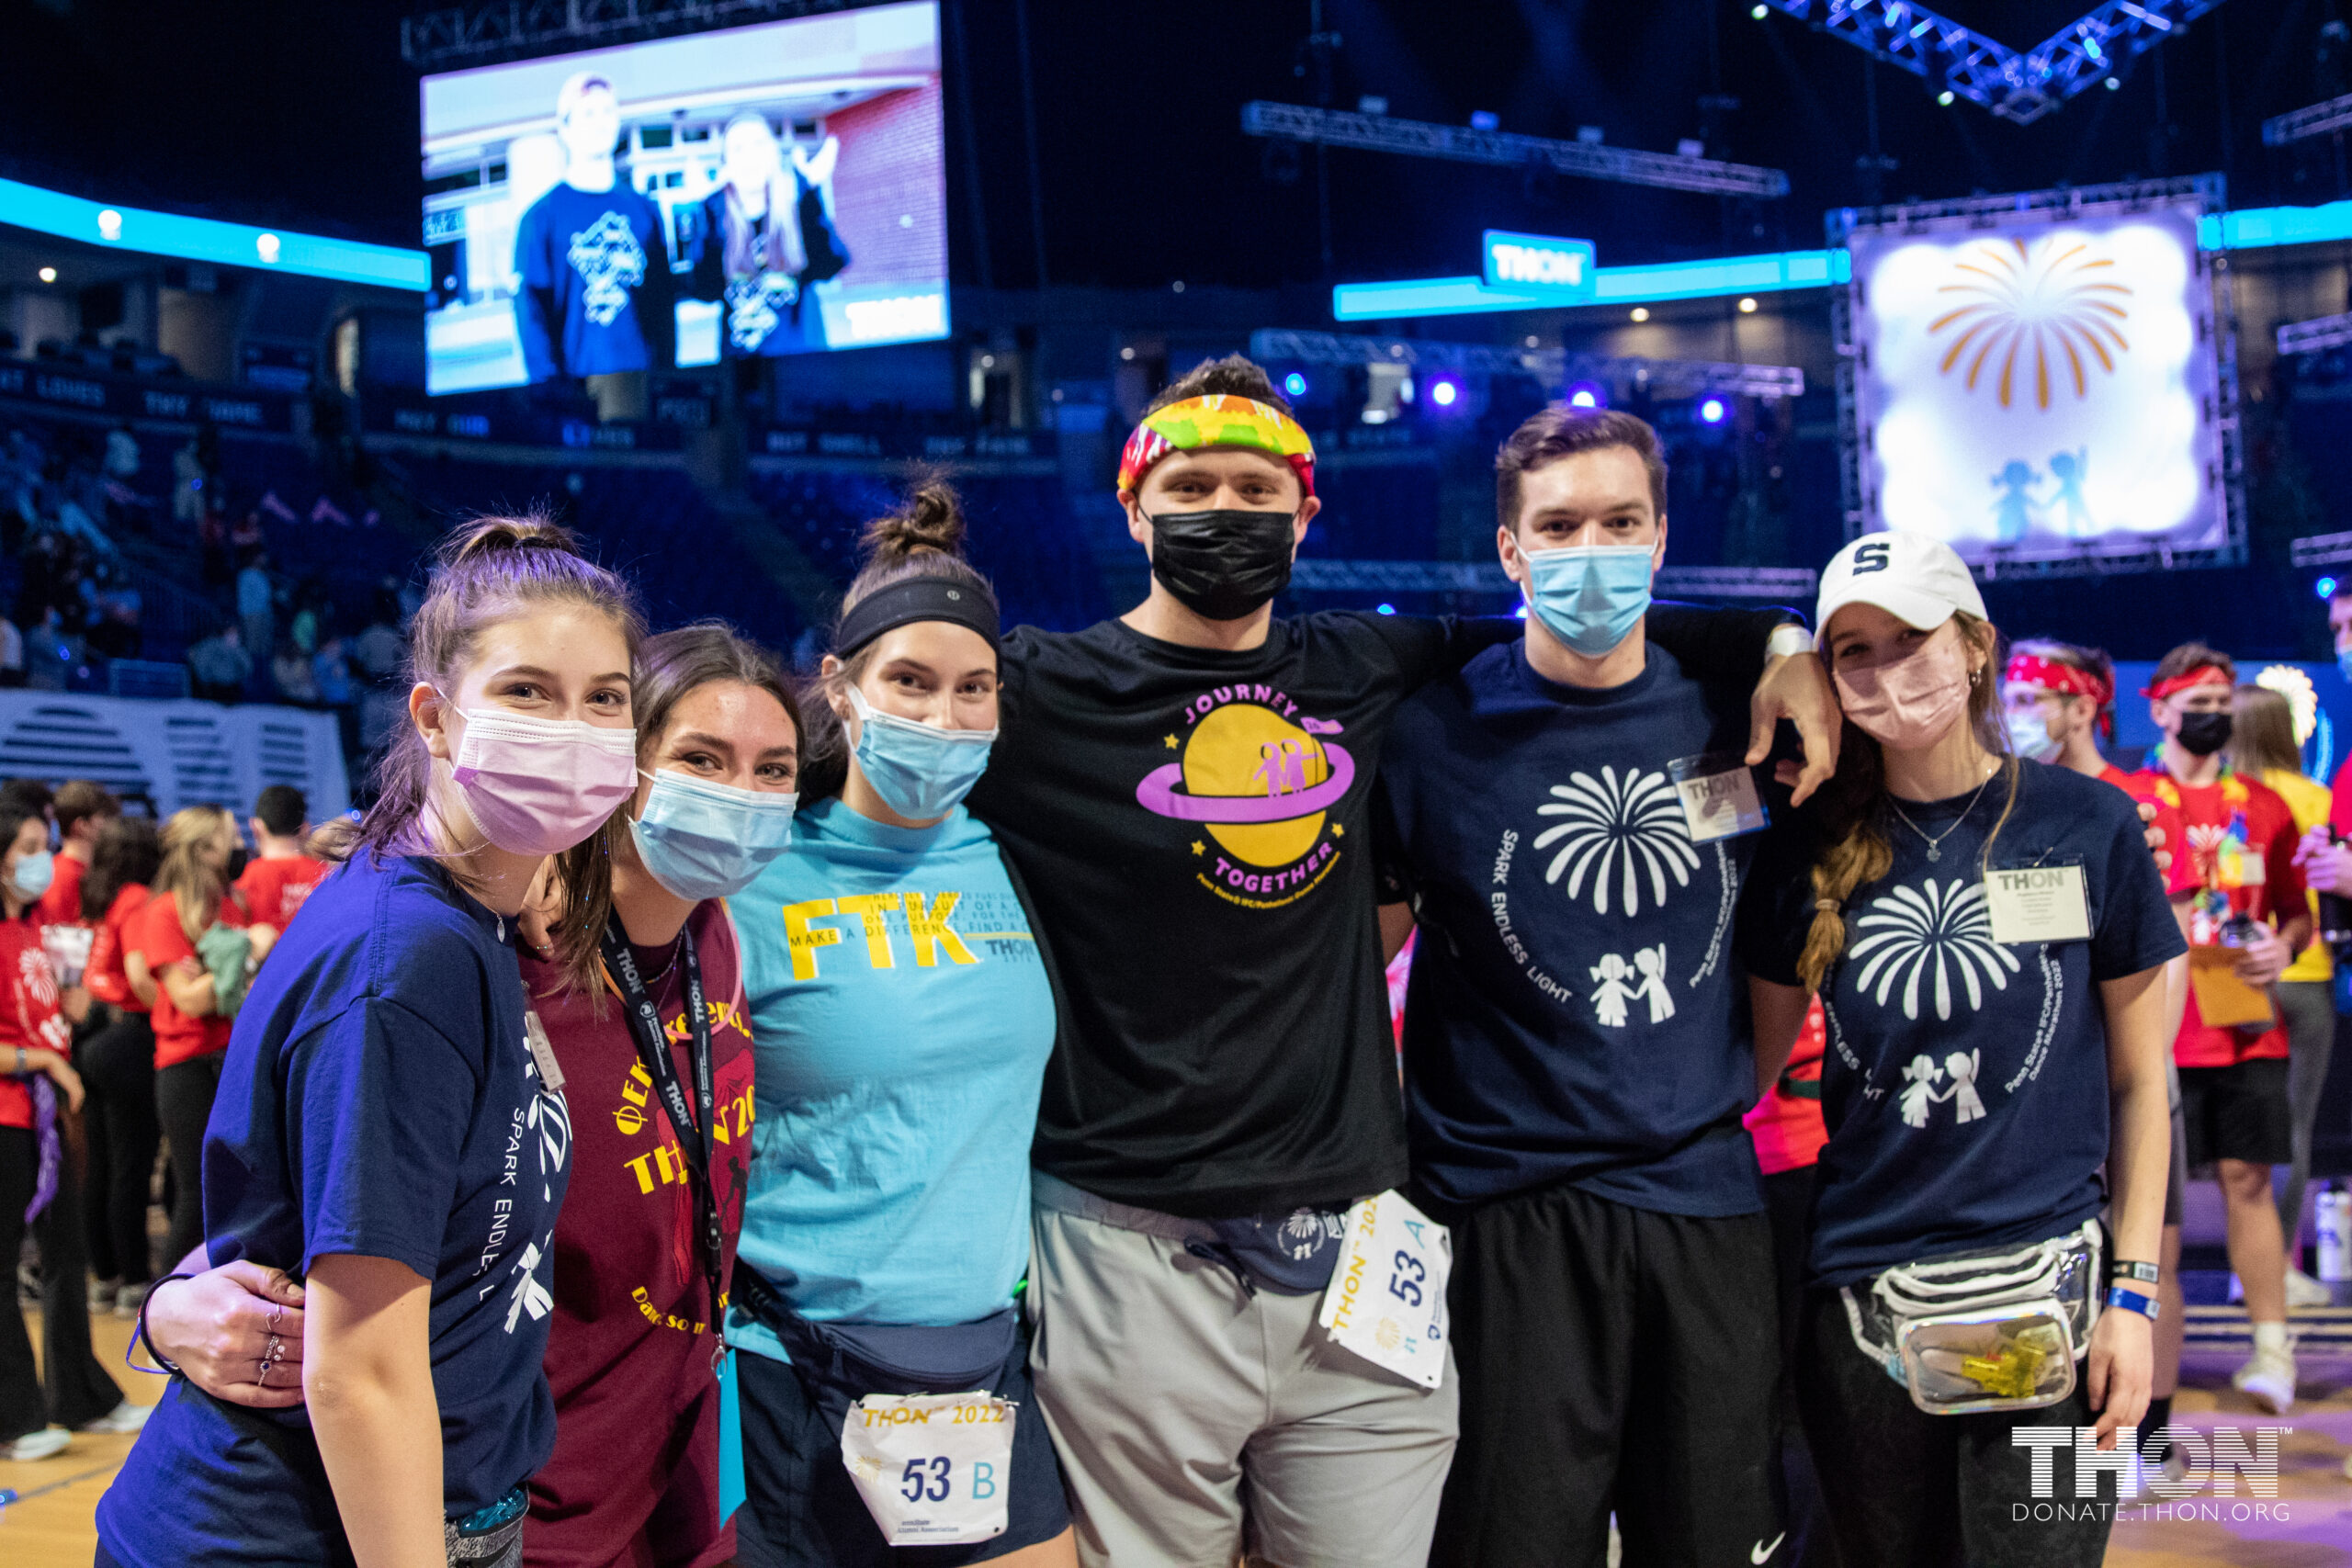 Best Costumes of THON Weekend 2023